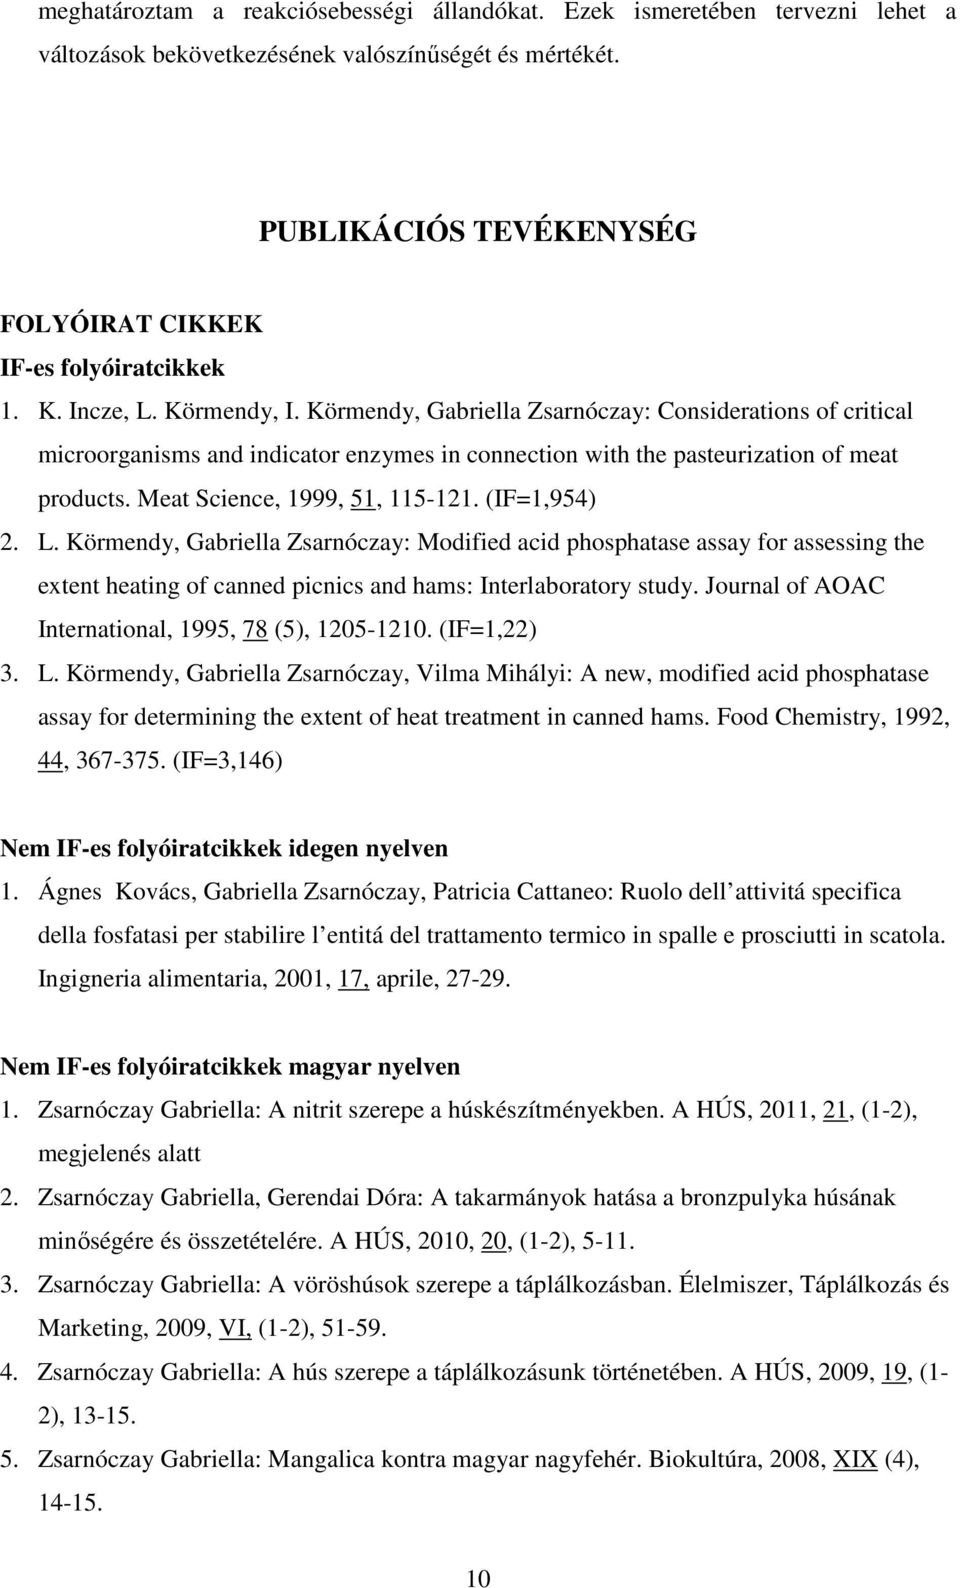 Meat Science, 1999, 51, 115-121. (IF=1,954) 2. L. Körmendy, Gabriella Zsarnóczay: Modified acid phosphatase assay for assessing the extent heating of canned picnics and hams: Interlaboratory study.